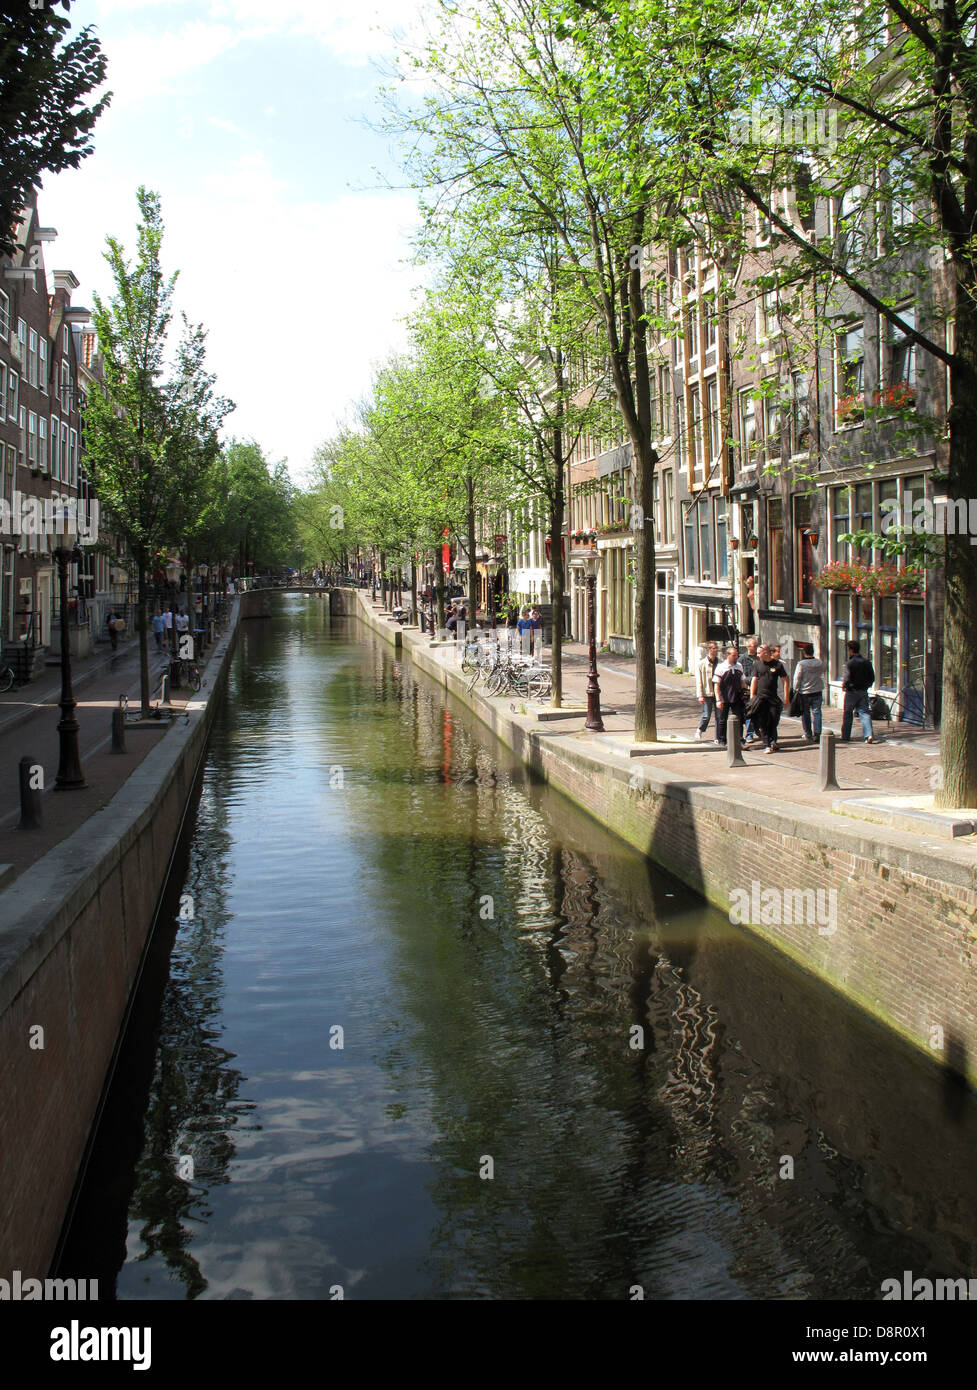 City of Canals, Amsterdam, Holland. Stock Photo